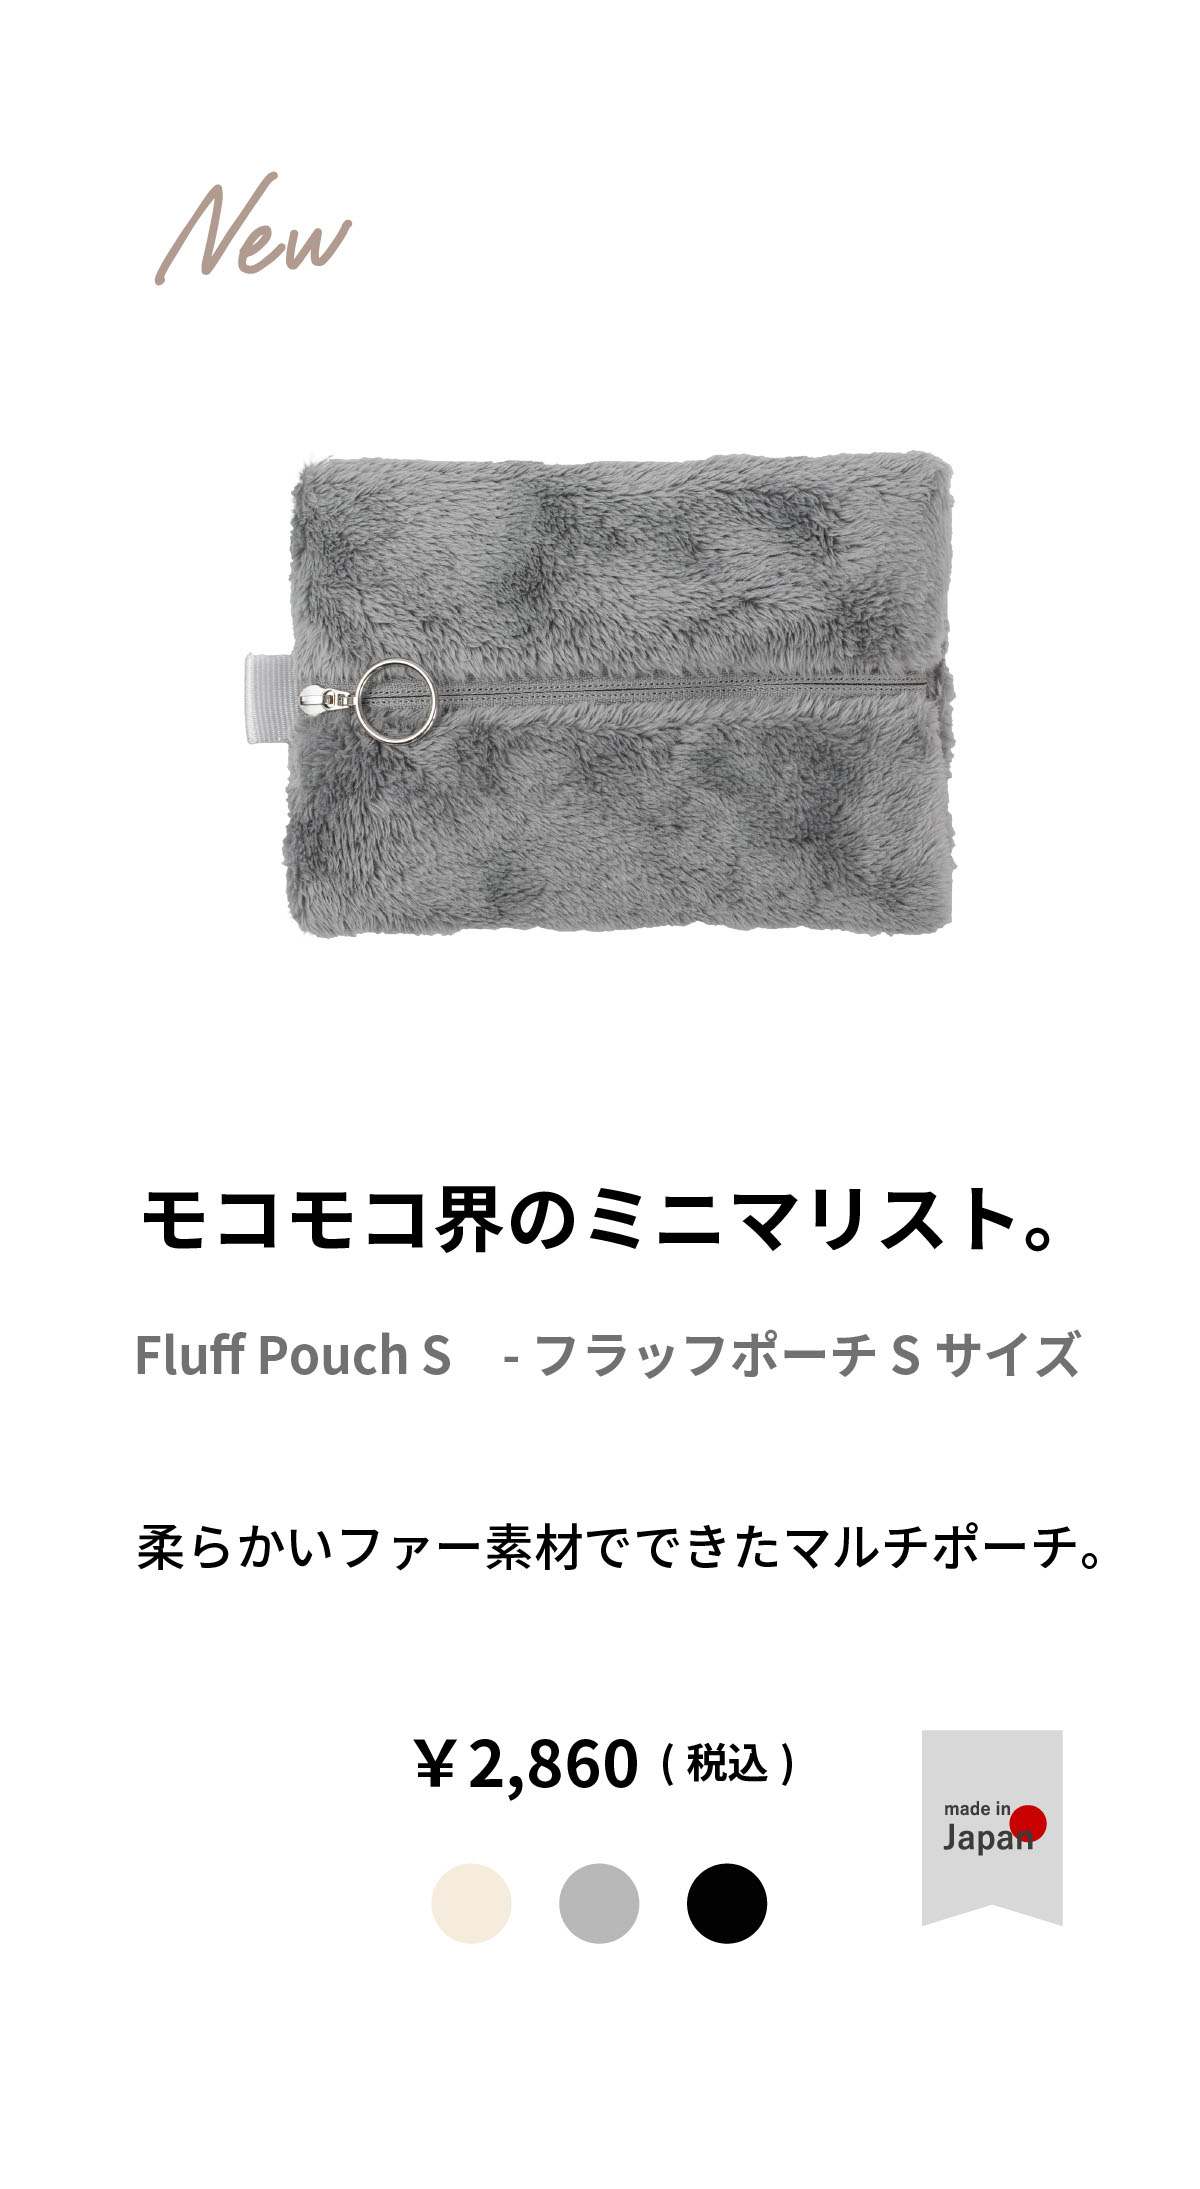 Fluff Pouch（フラッフポーチ）Sサイズ 化粧品 コスメポーチ メンズ 小物 ガジェット 送料無料 新生活 ギフト プレゼント プチギフト｜asoboze｜03